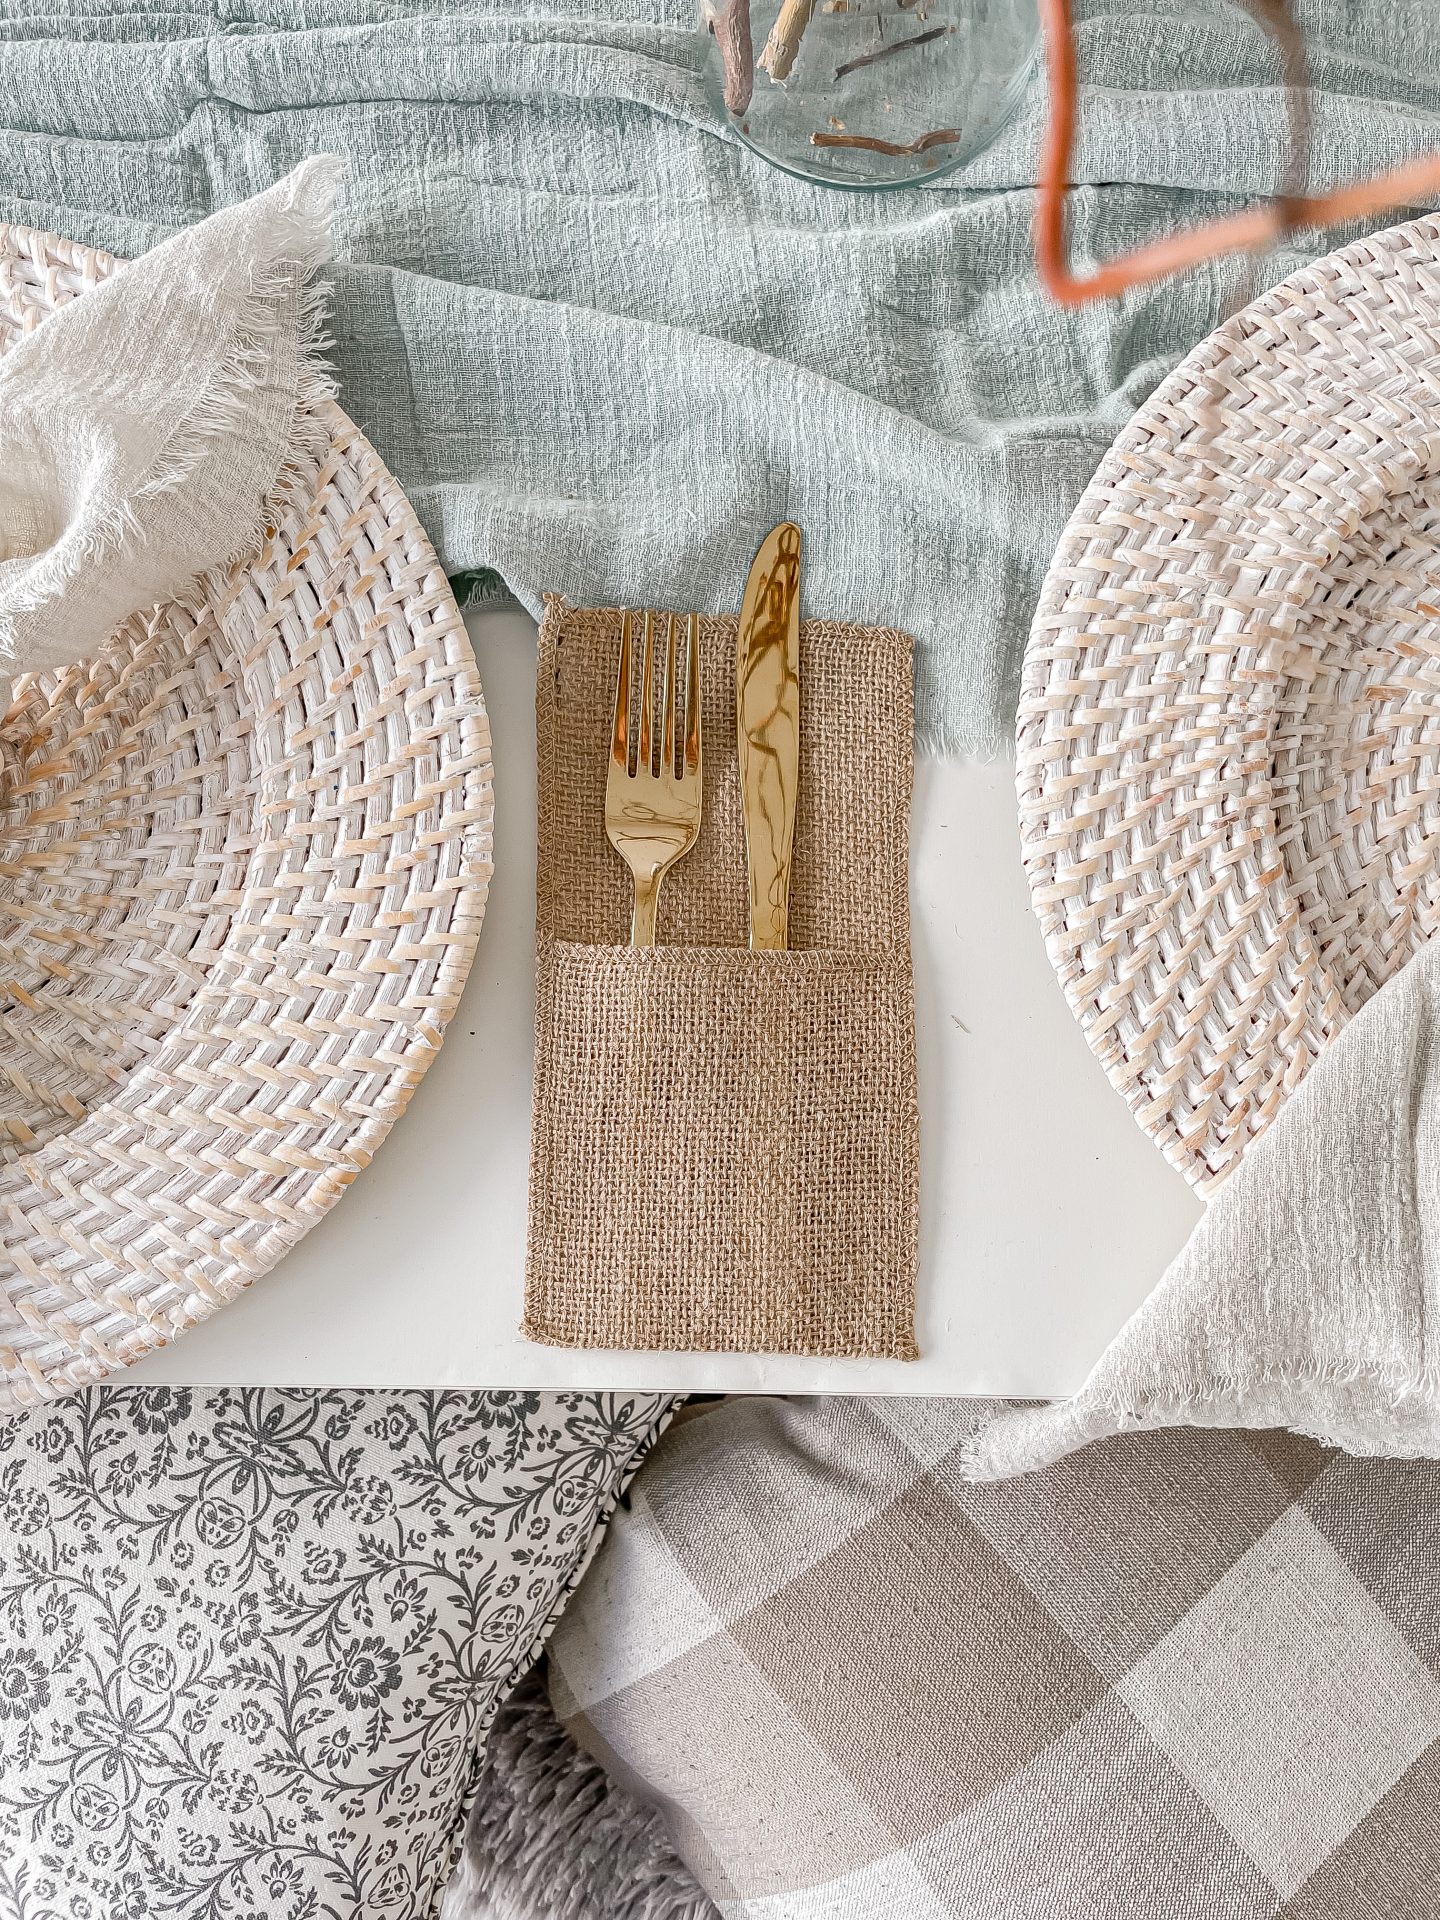 STYLING A NEUTRAL SPRING TABLESCAPE